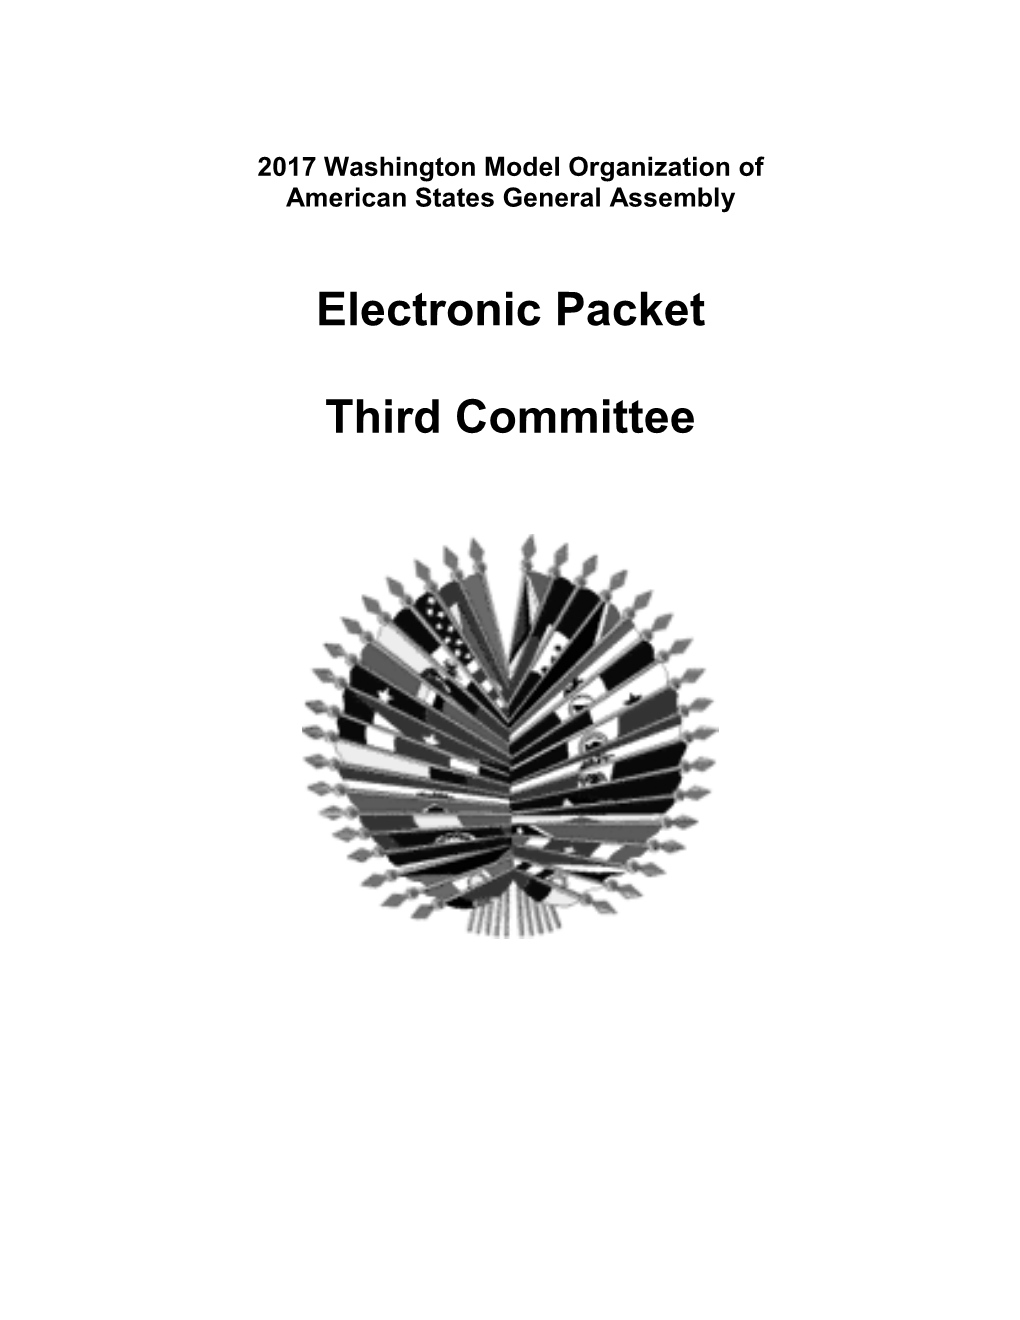 Electronic Packet Third Committee